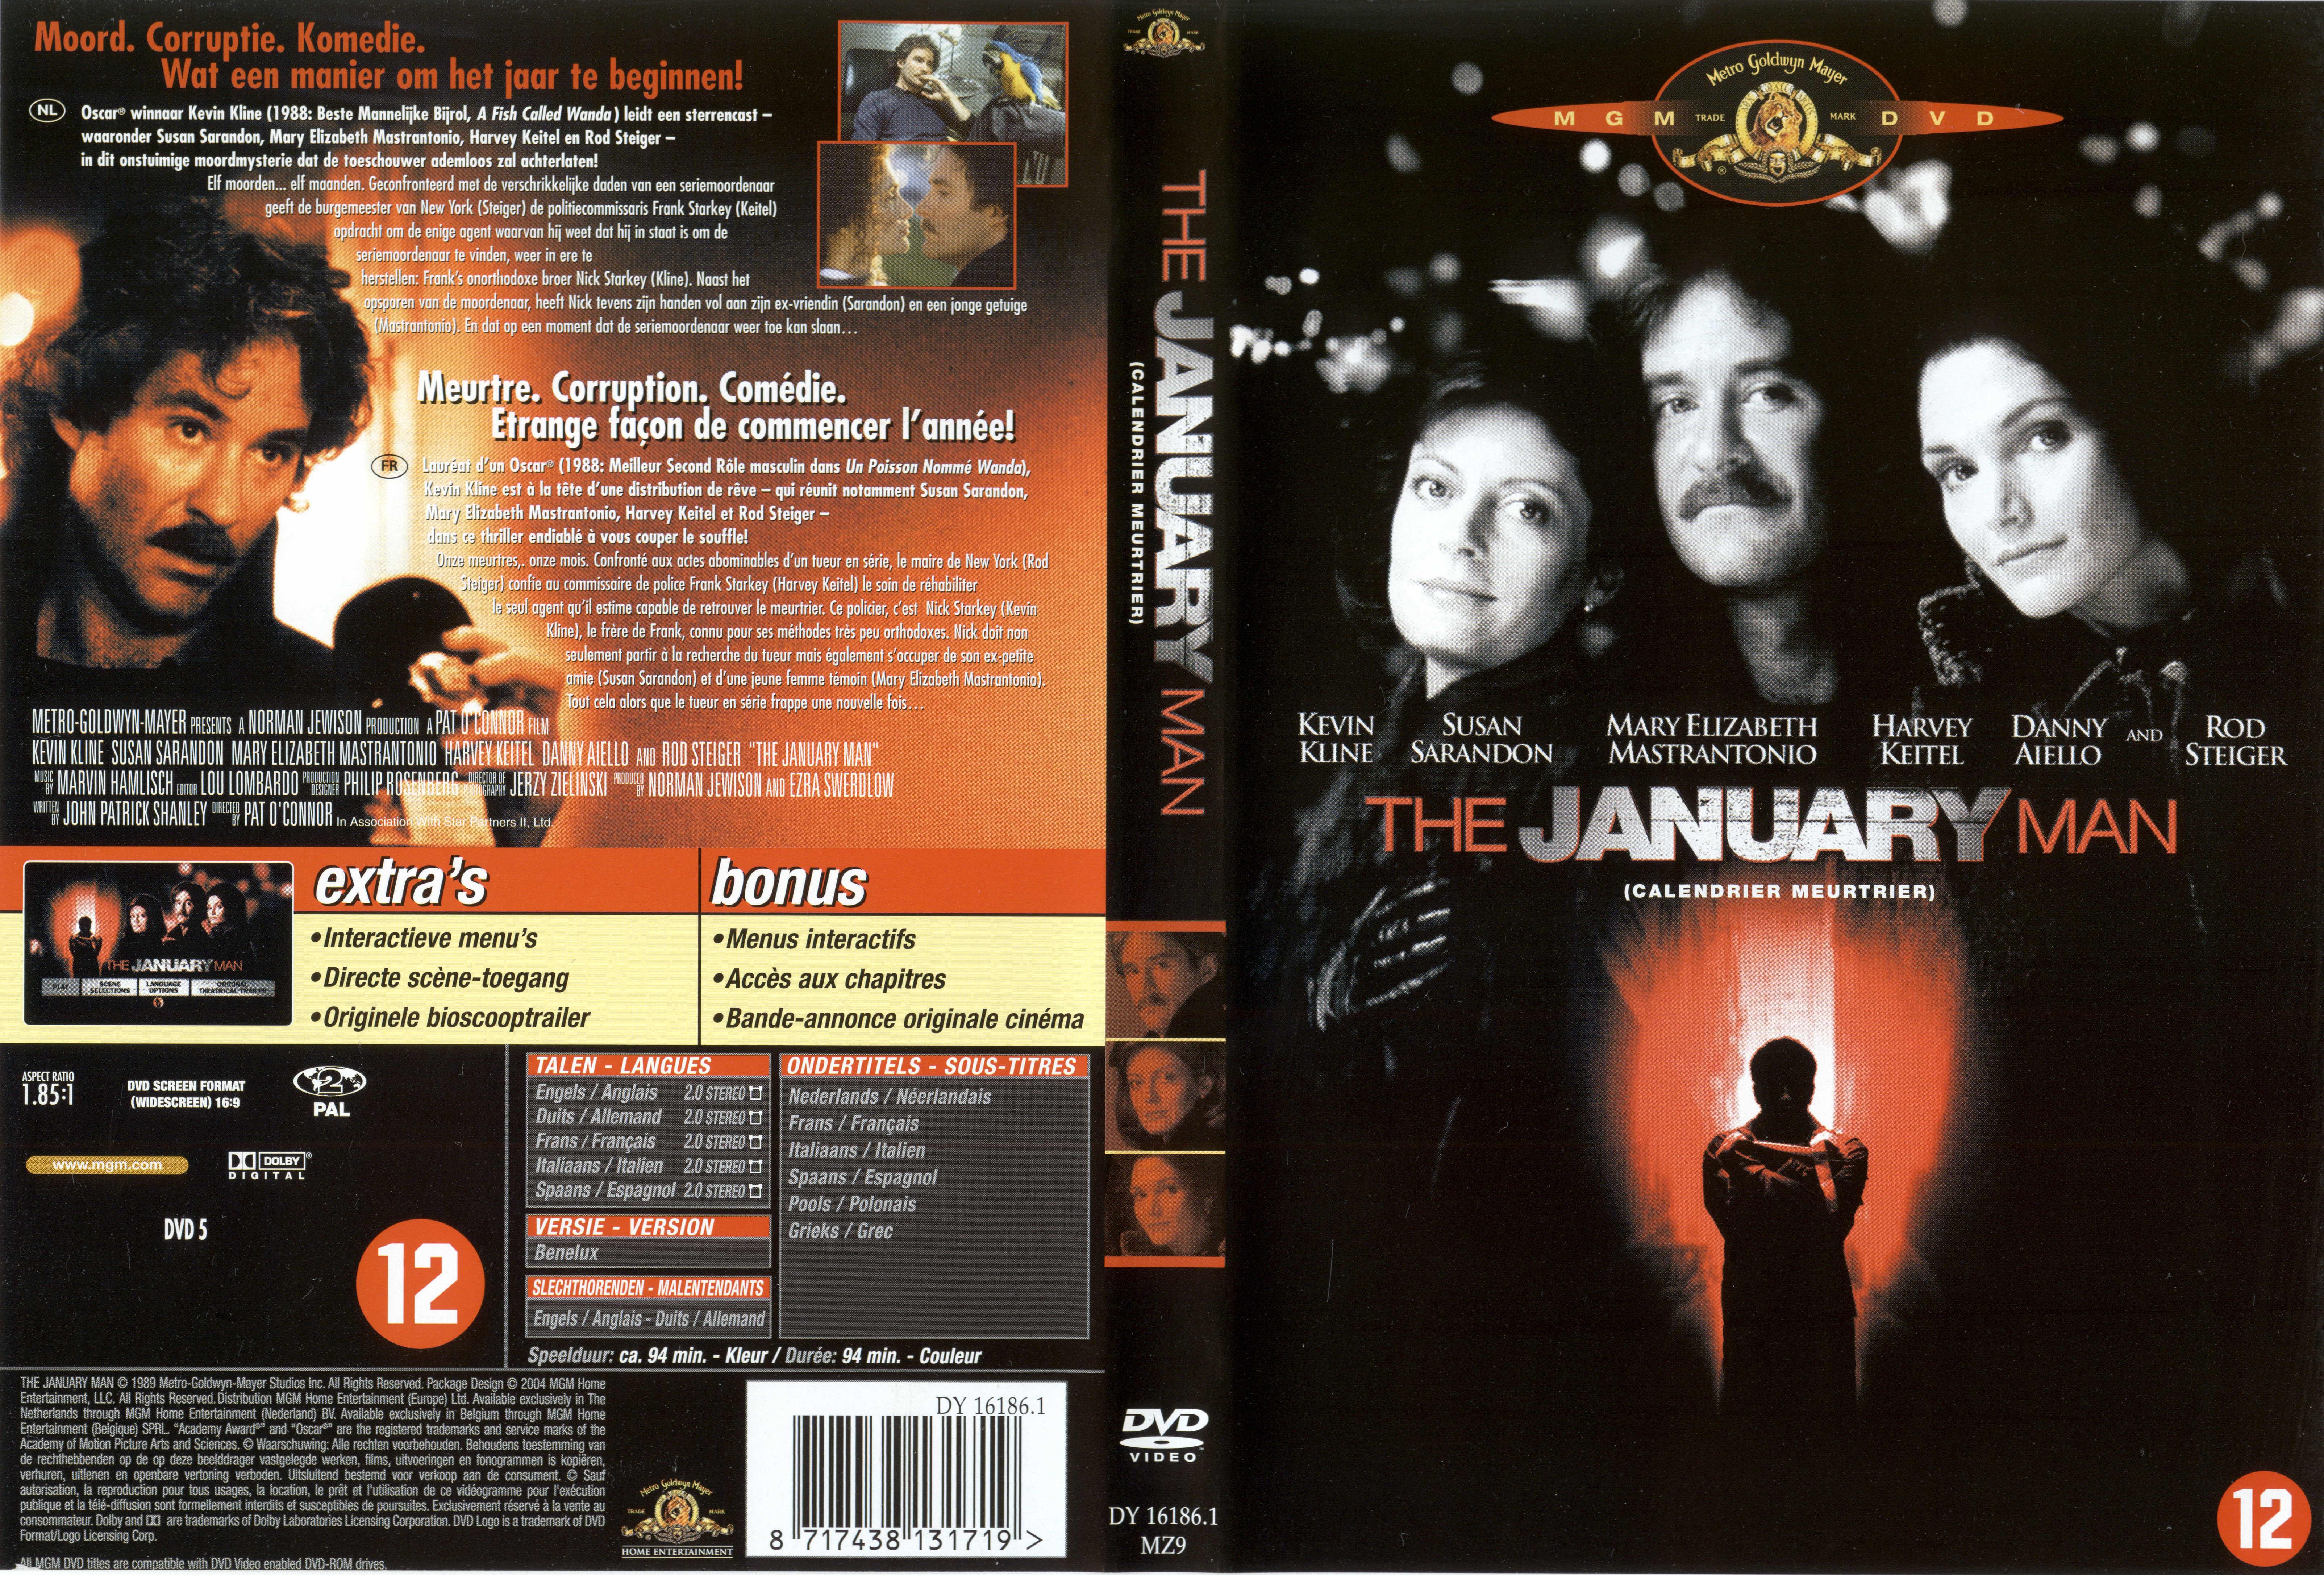 Jaquette DVD The january man - Calendrier meurtrier